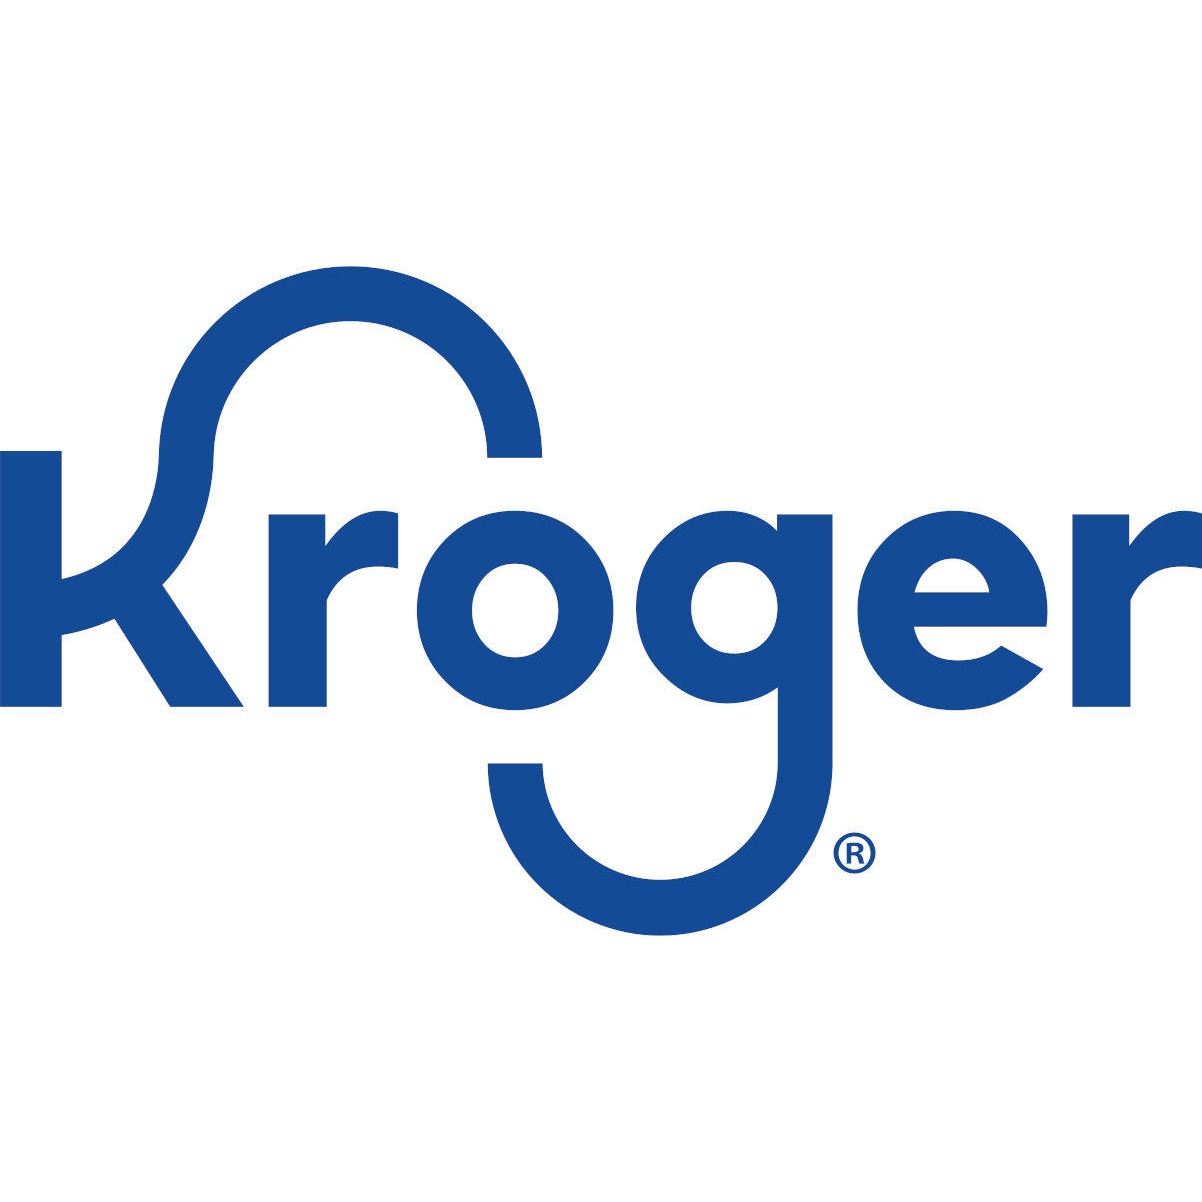 Kroger Grocery Pickup and Delivery Photo